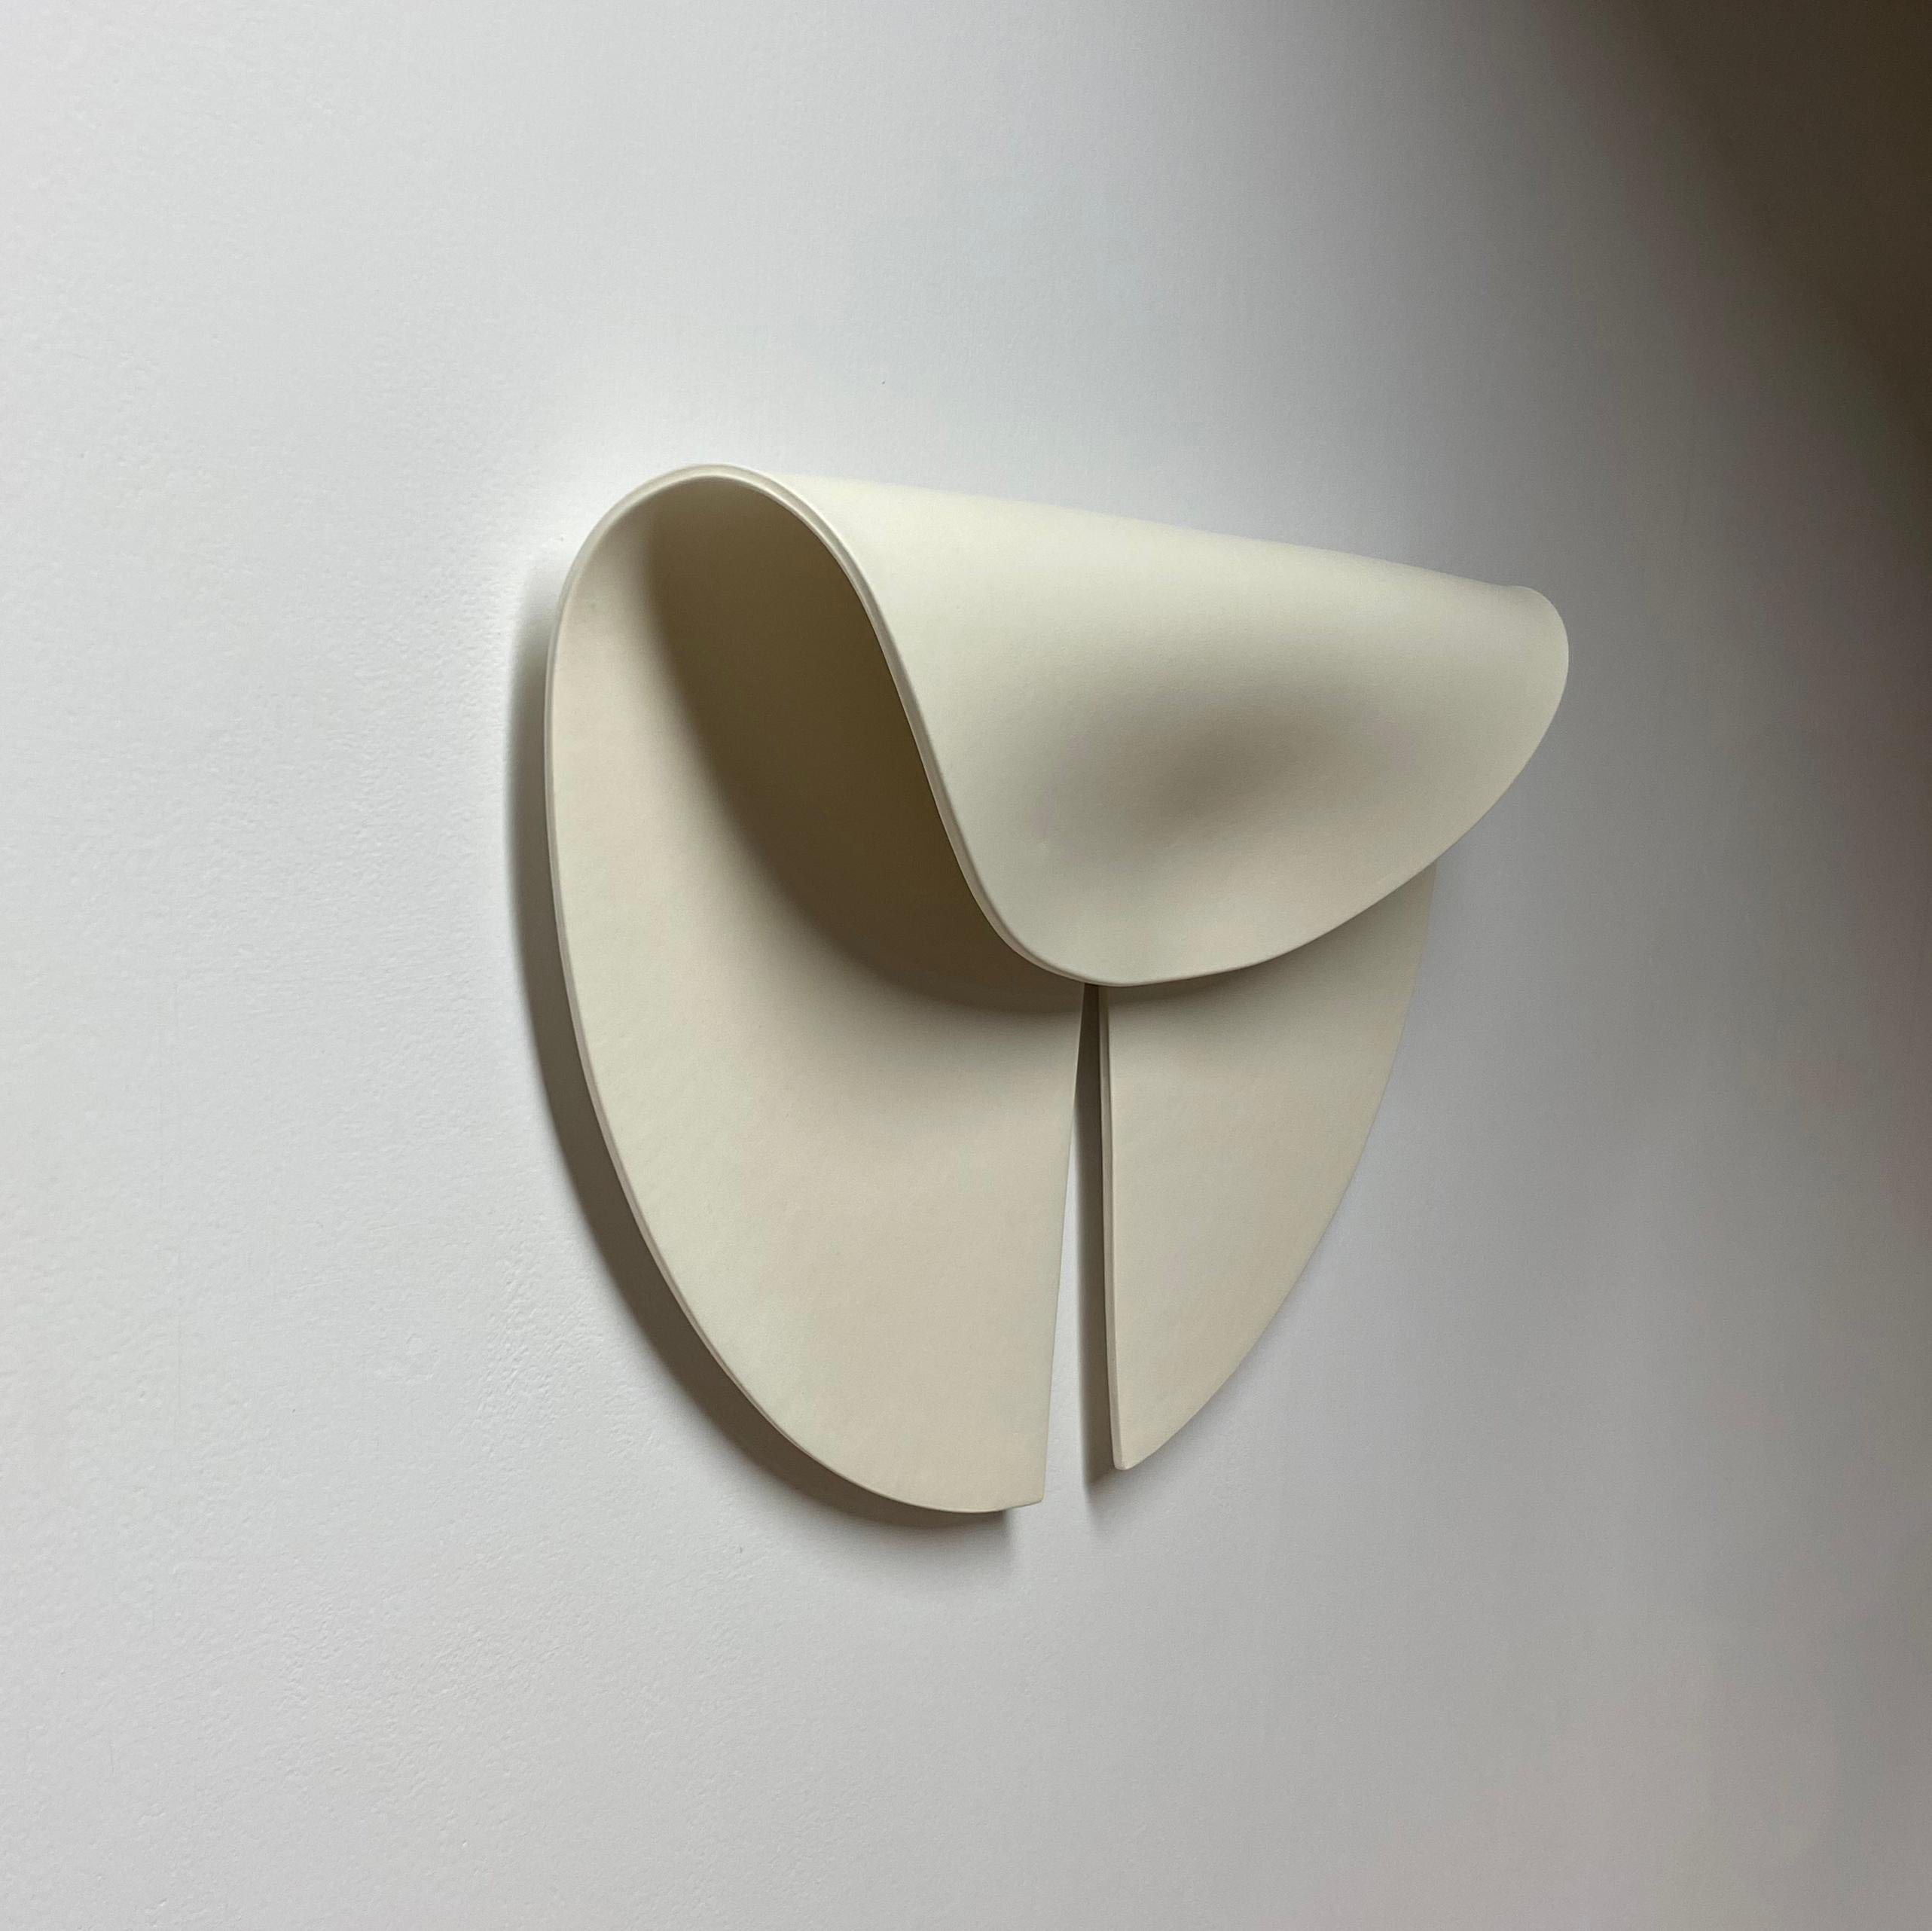 Fired Ceramic Wall Sculpture: 'Leaf' PAIR OF TWO / By Olivia Barry For Sale